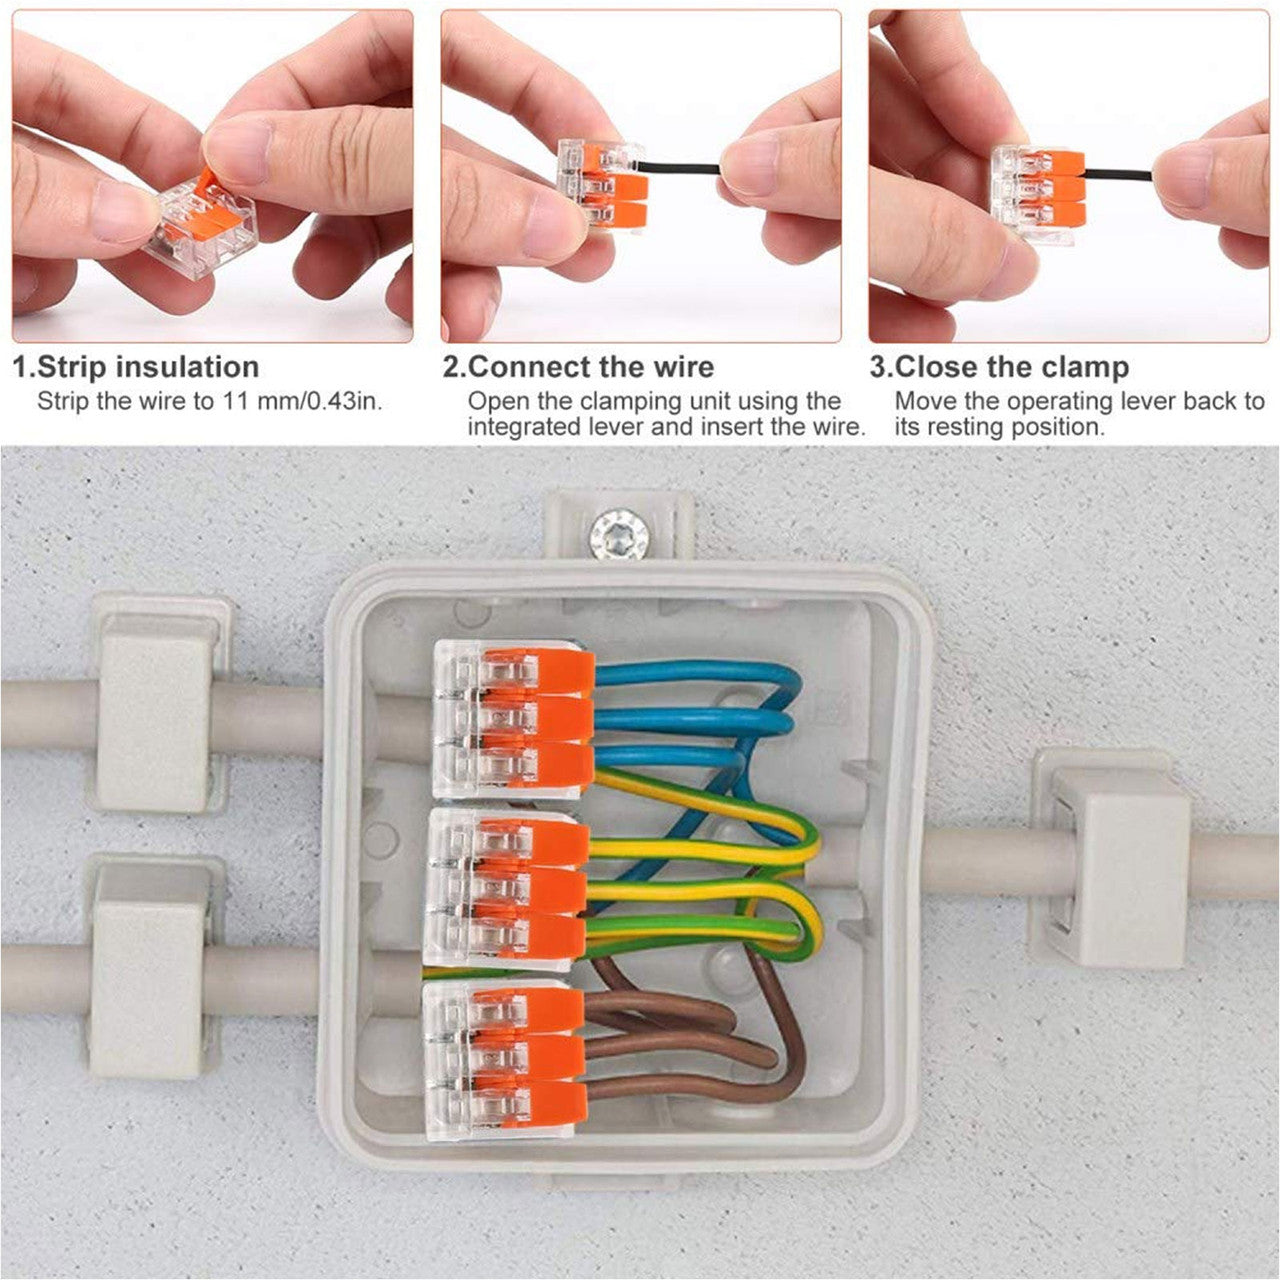 Lever Nuts, Wire Connector Assortment Set - Compact Splicing Connector Lever Nut Kit for Electrical Wires Solid Stranded Flexible Wires A221-412, A221-413, A221-415, 75 Pcs